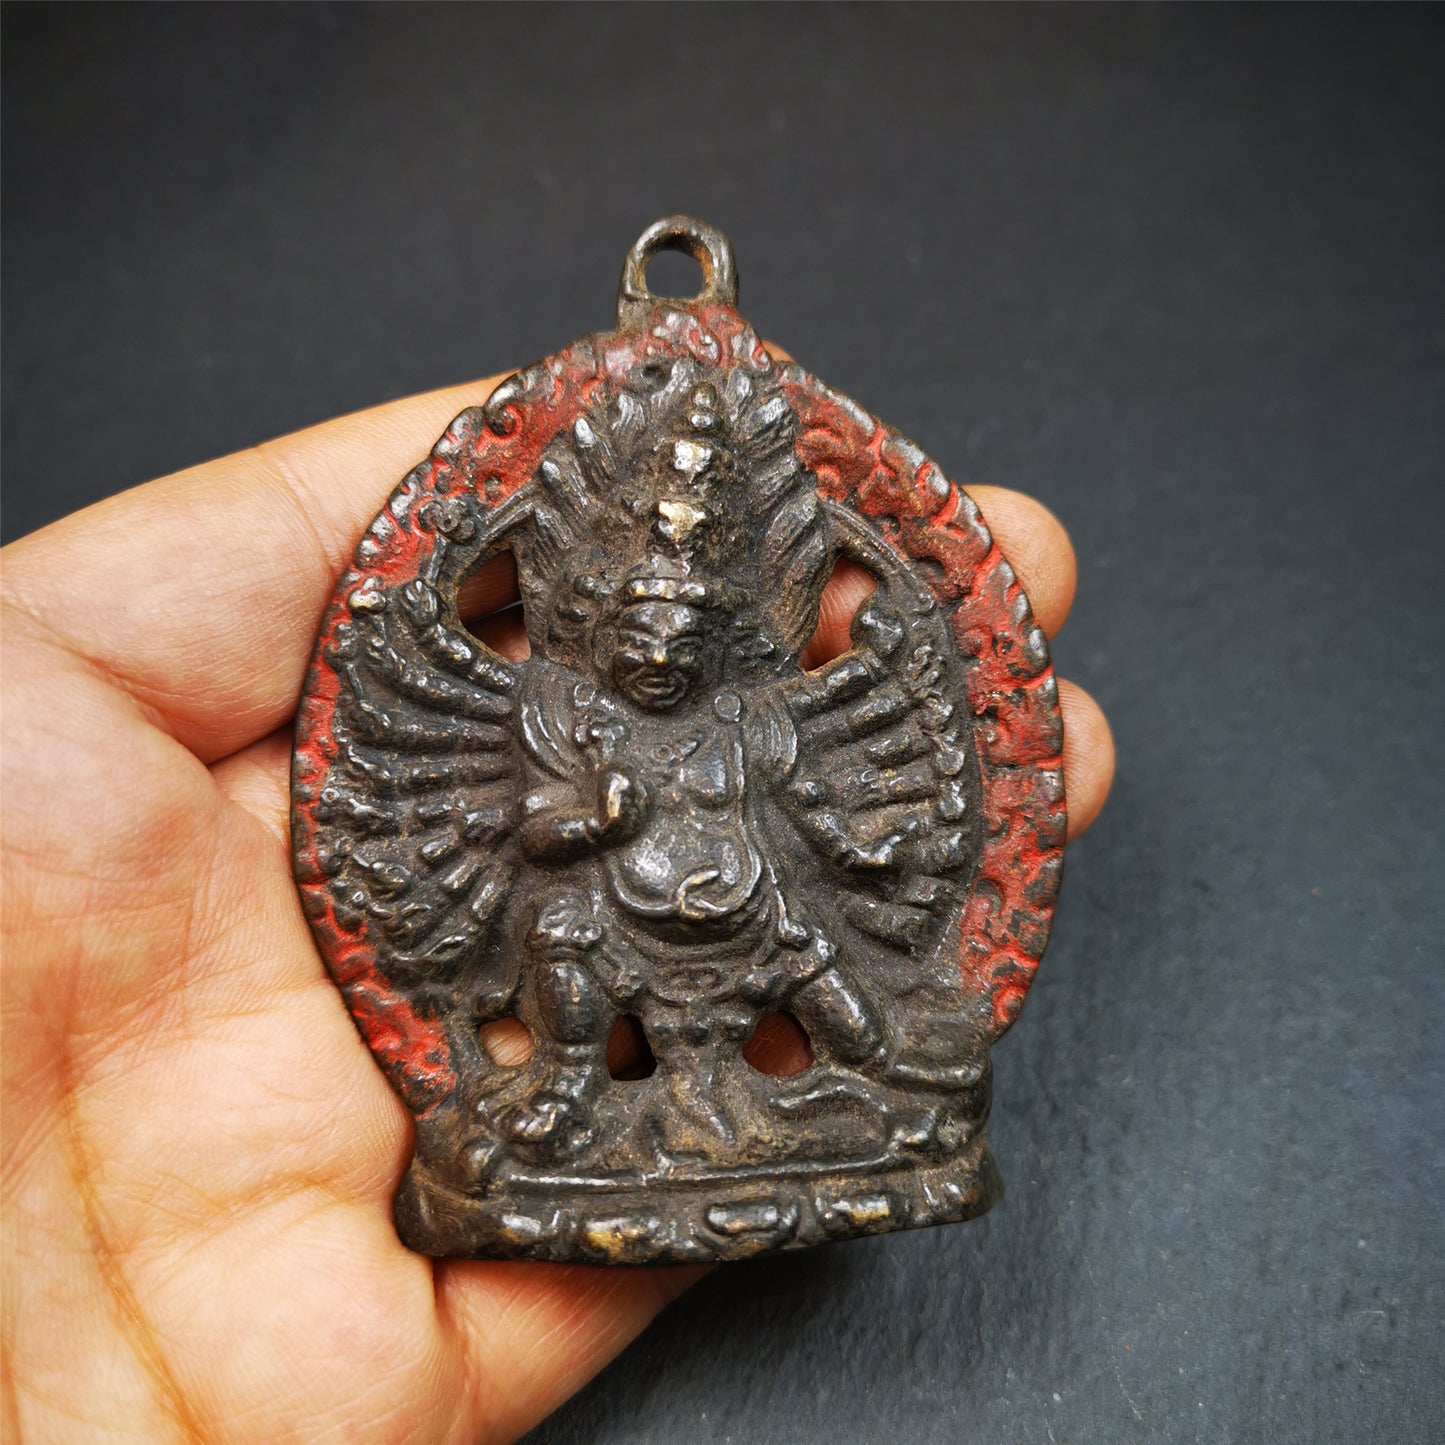 This old Yamantaka,Vajrabhairava statue was collected from gerze, Tibet. It is made of copper, paint with mineral pigments,size is 3.5 × 2.6 inches . You can make it as a amulet pendant, or put it into your shrine.